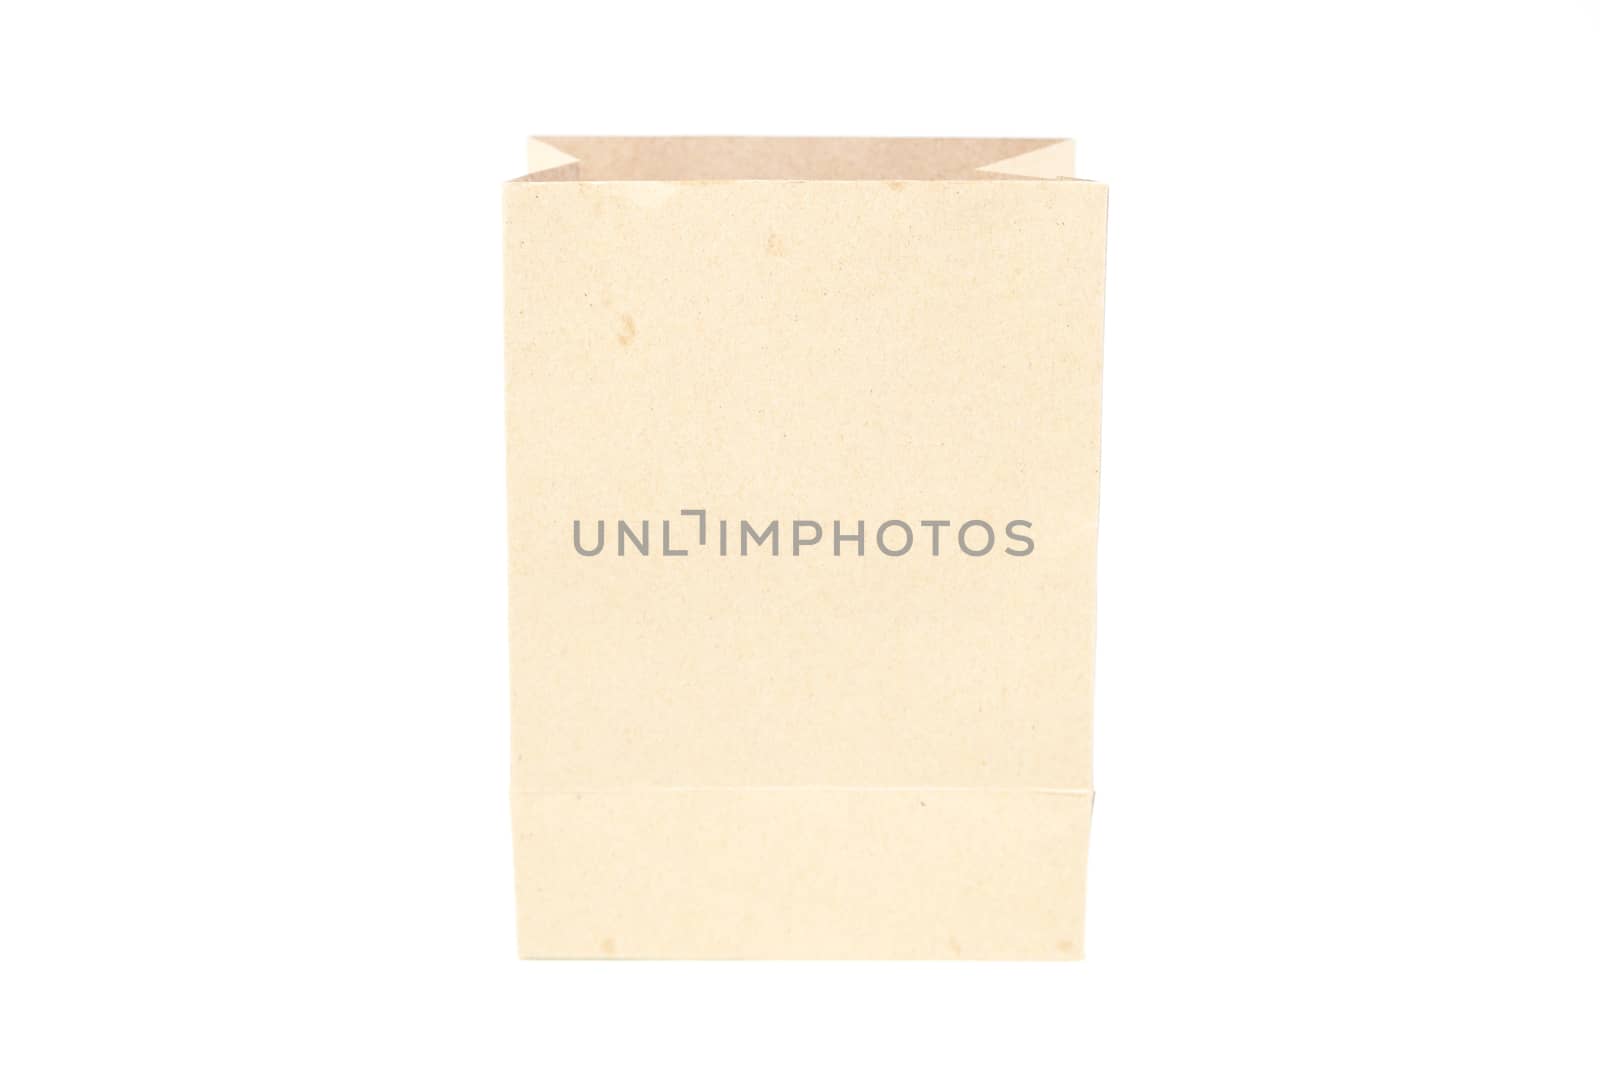 Brown paper bag. In brown paper bag. Isolated white background